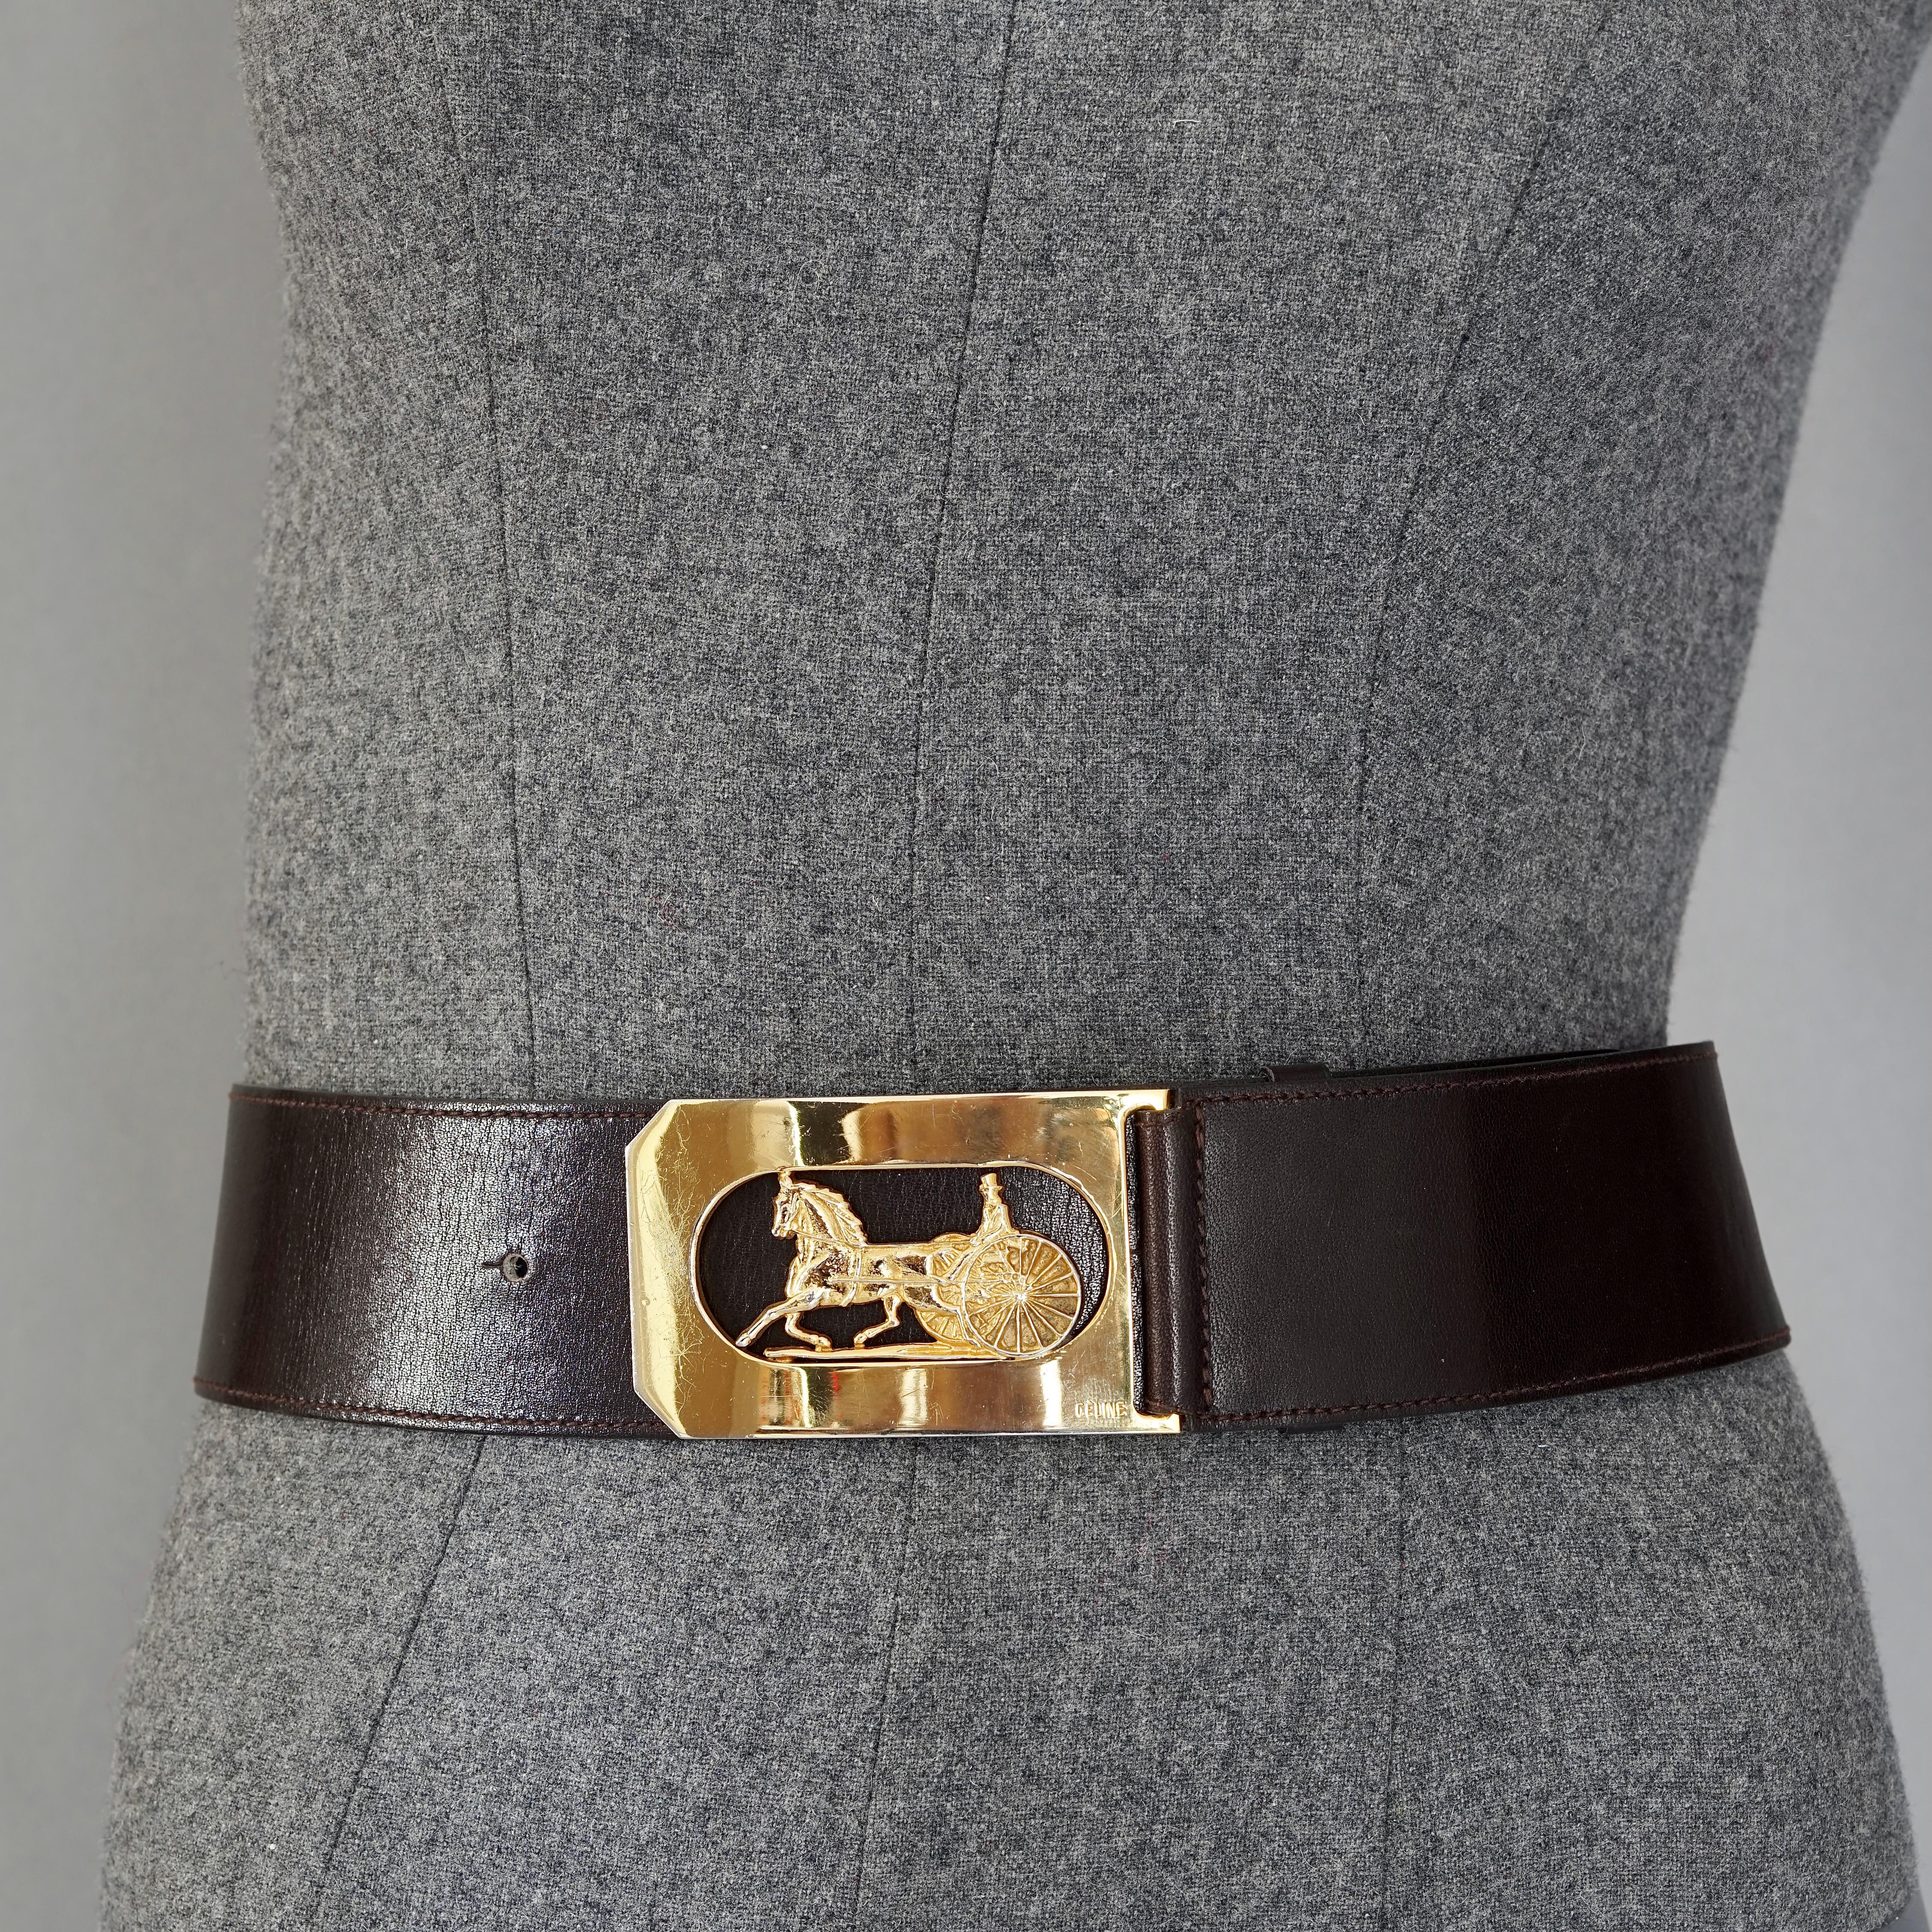 Vintage CELINE PARIS Horse Carriage Buckle Dark Brown Leather Belt

Measurements:
Buckle Height: 1.97 inches (5 cm)
Buckle Width: 3.15 inches (8 cm cm)
Strap Height: 1.97 inches (5 cm)
Wearable Length: 25.98 inches to 31.89 inches (66 cm to 81